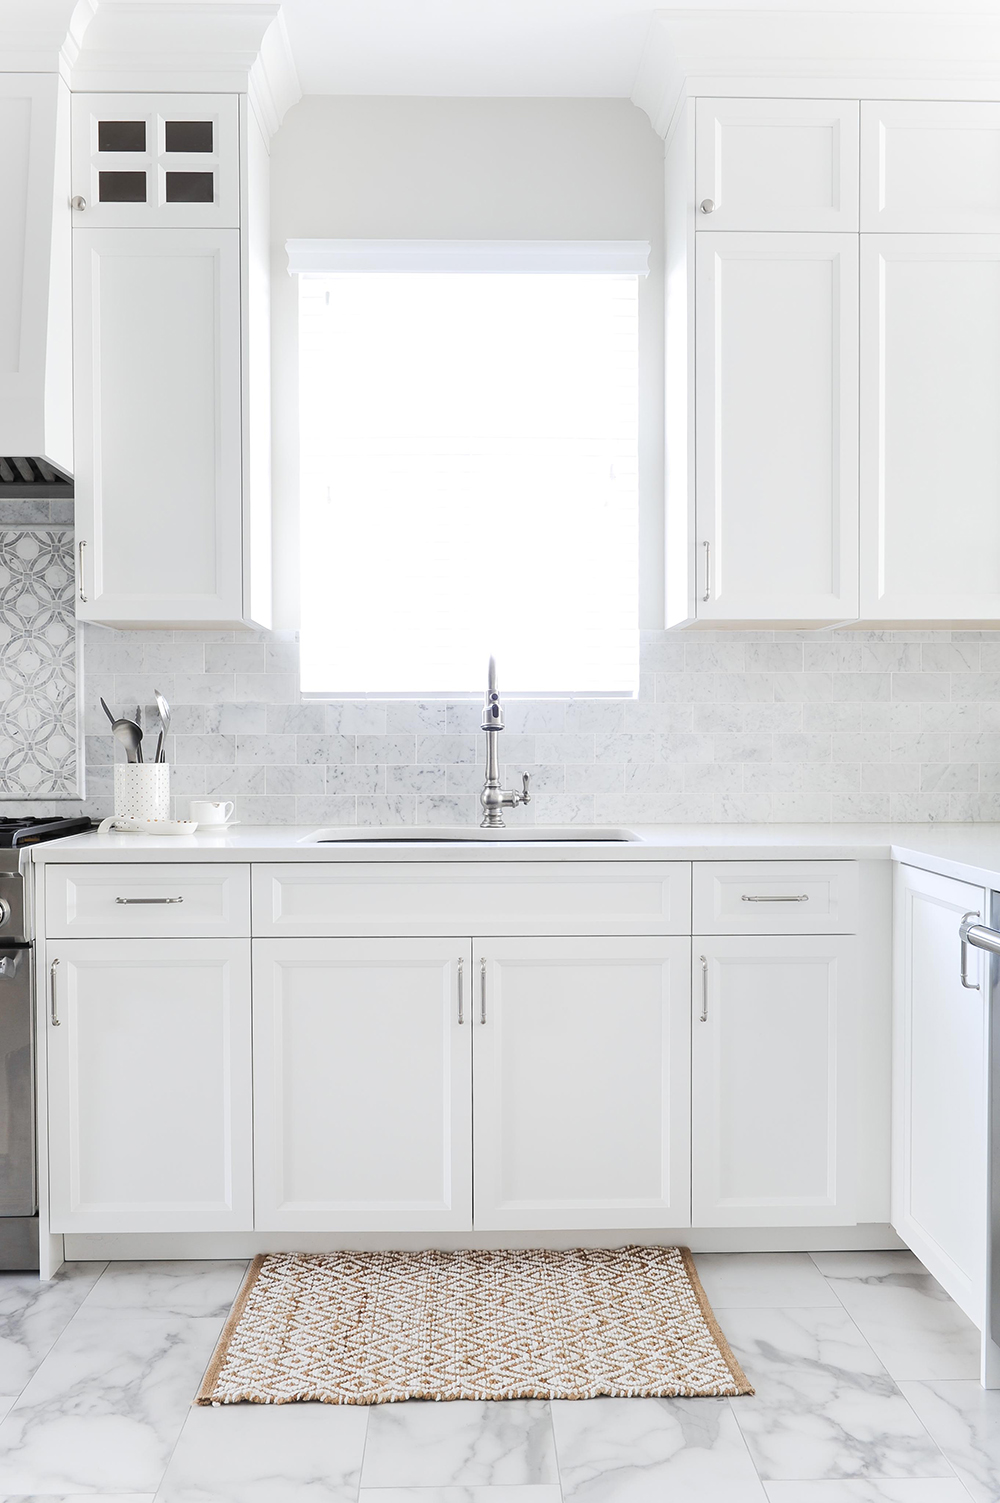 Modern white kitchen with classic shaker cabinetry.